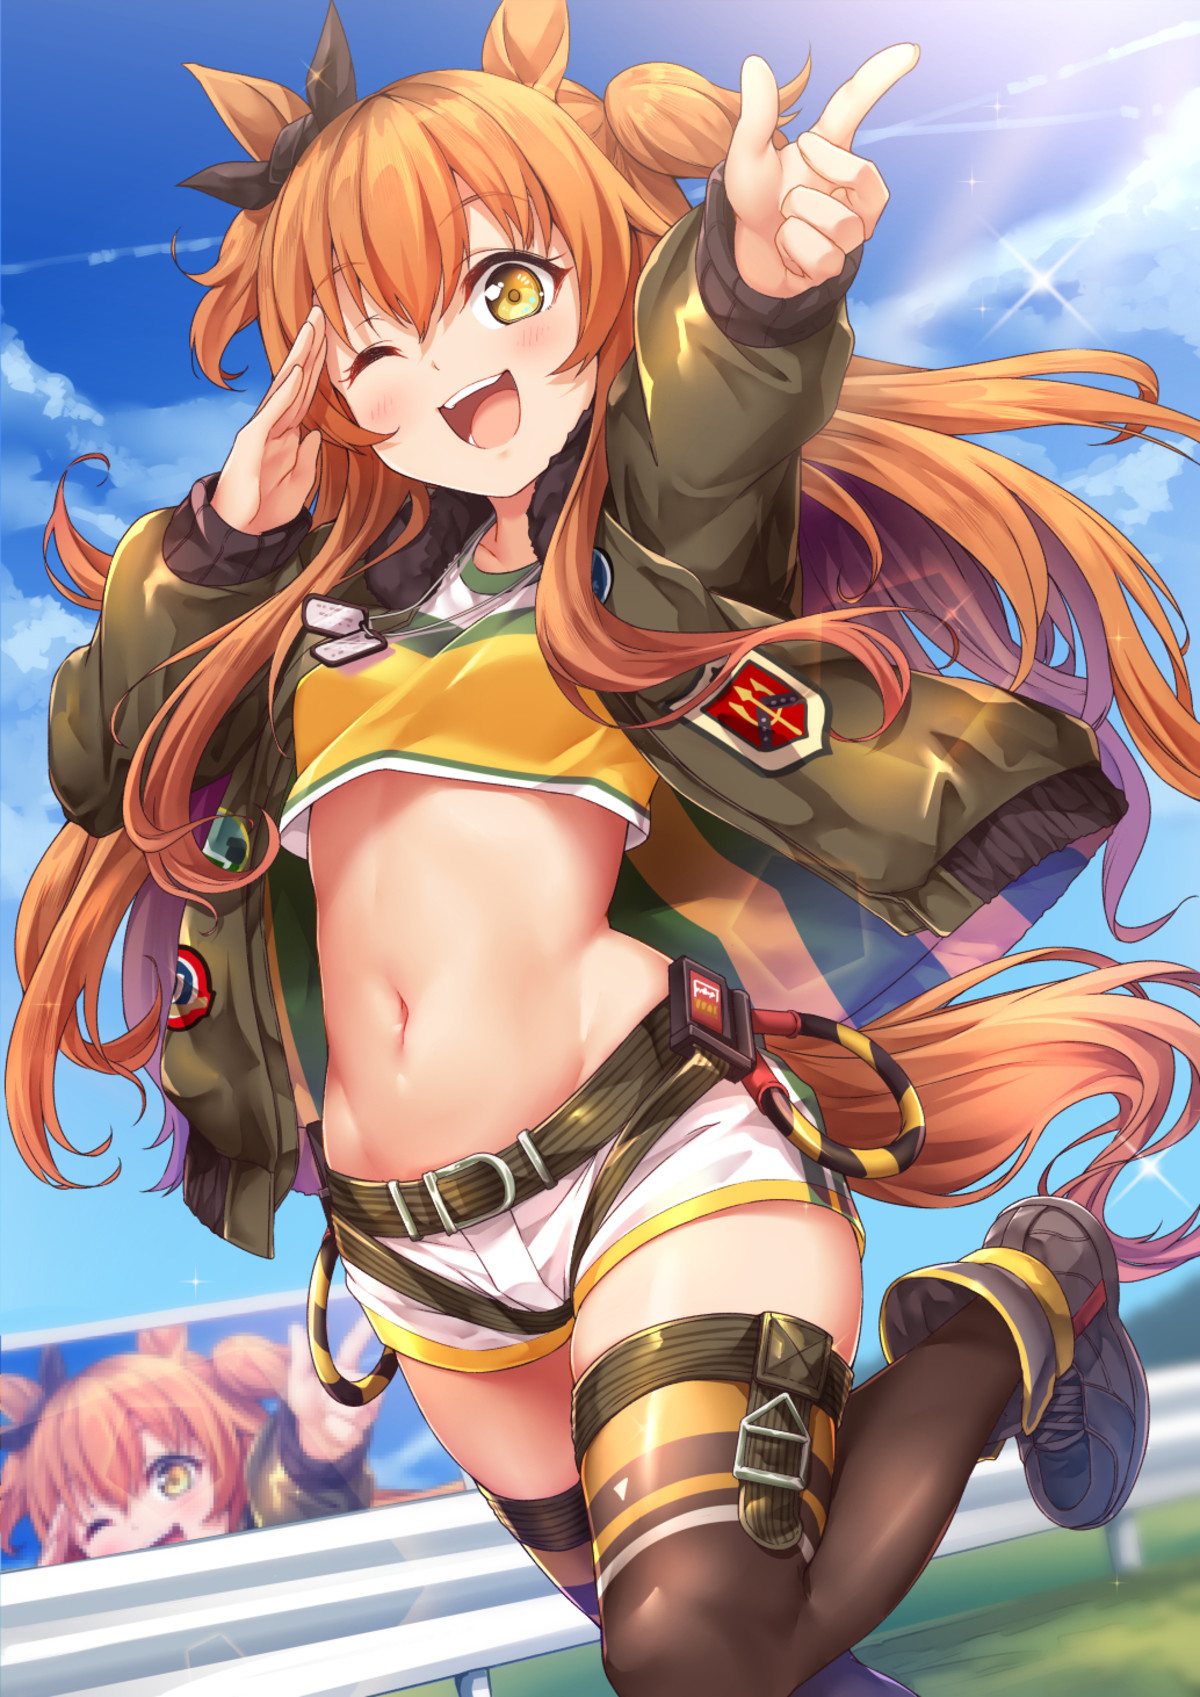 Uma Daily Waifu Post #21 - Mayano Top Gun. join list: Umawaifus (24 subs)Mention History She is also the Japanese poster girl for the new Top Gun... Volodia a horse girl tummy